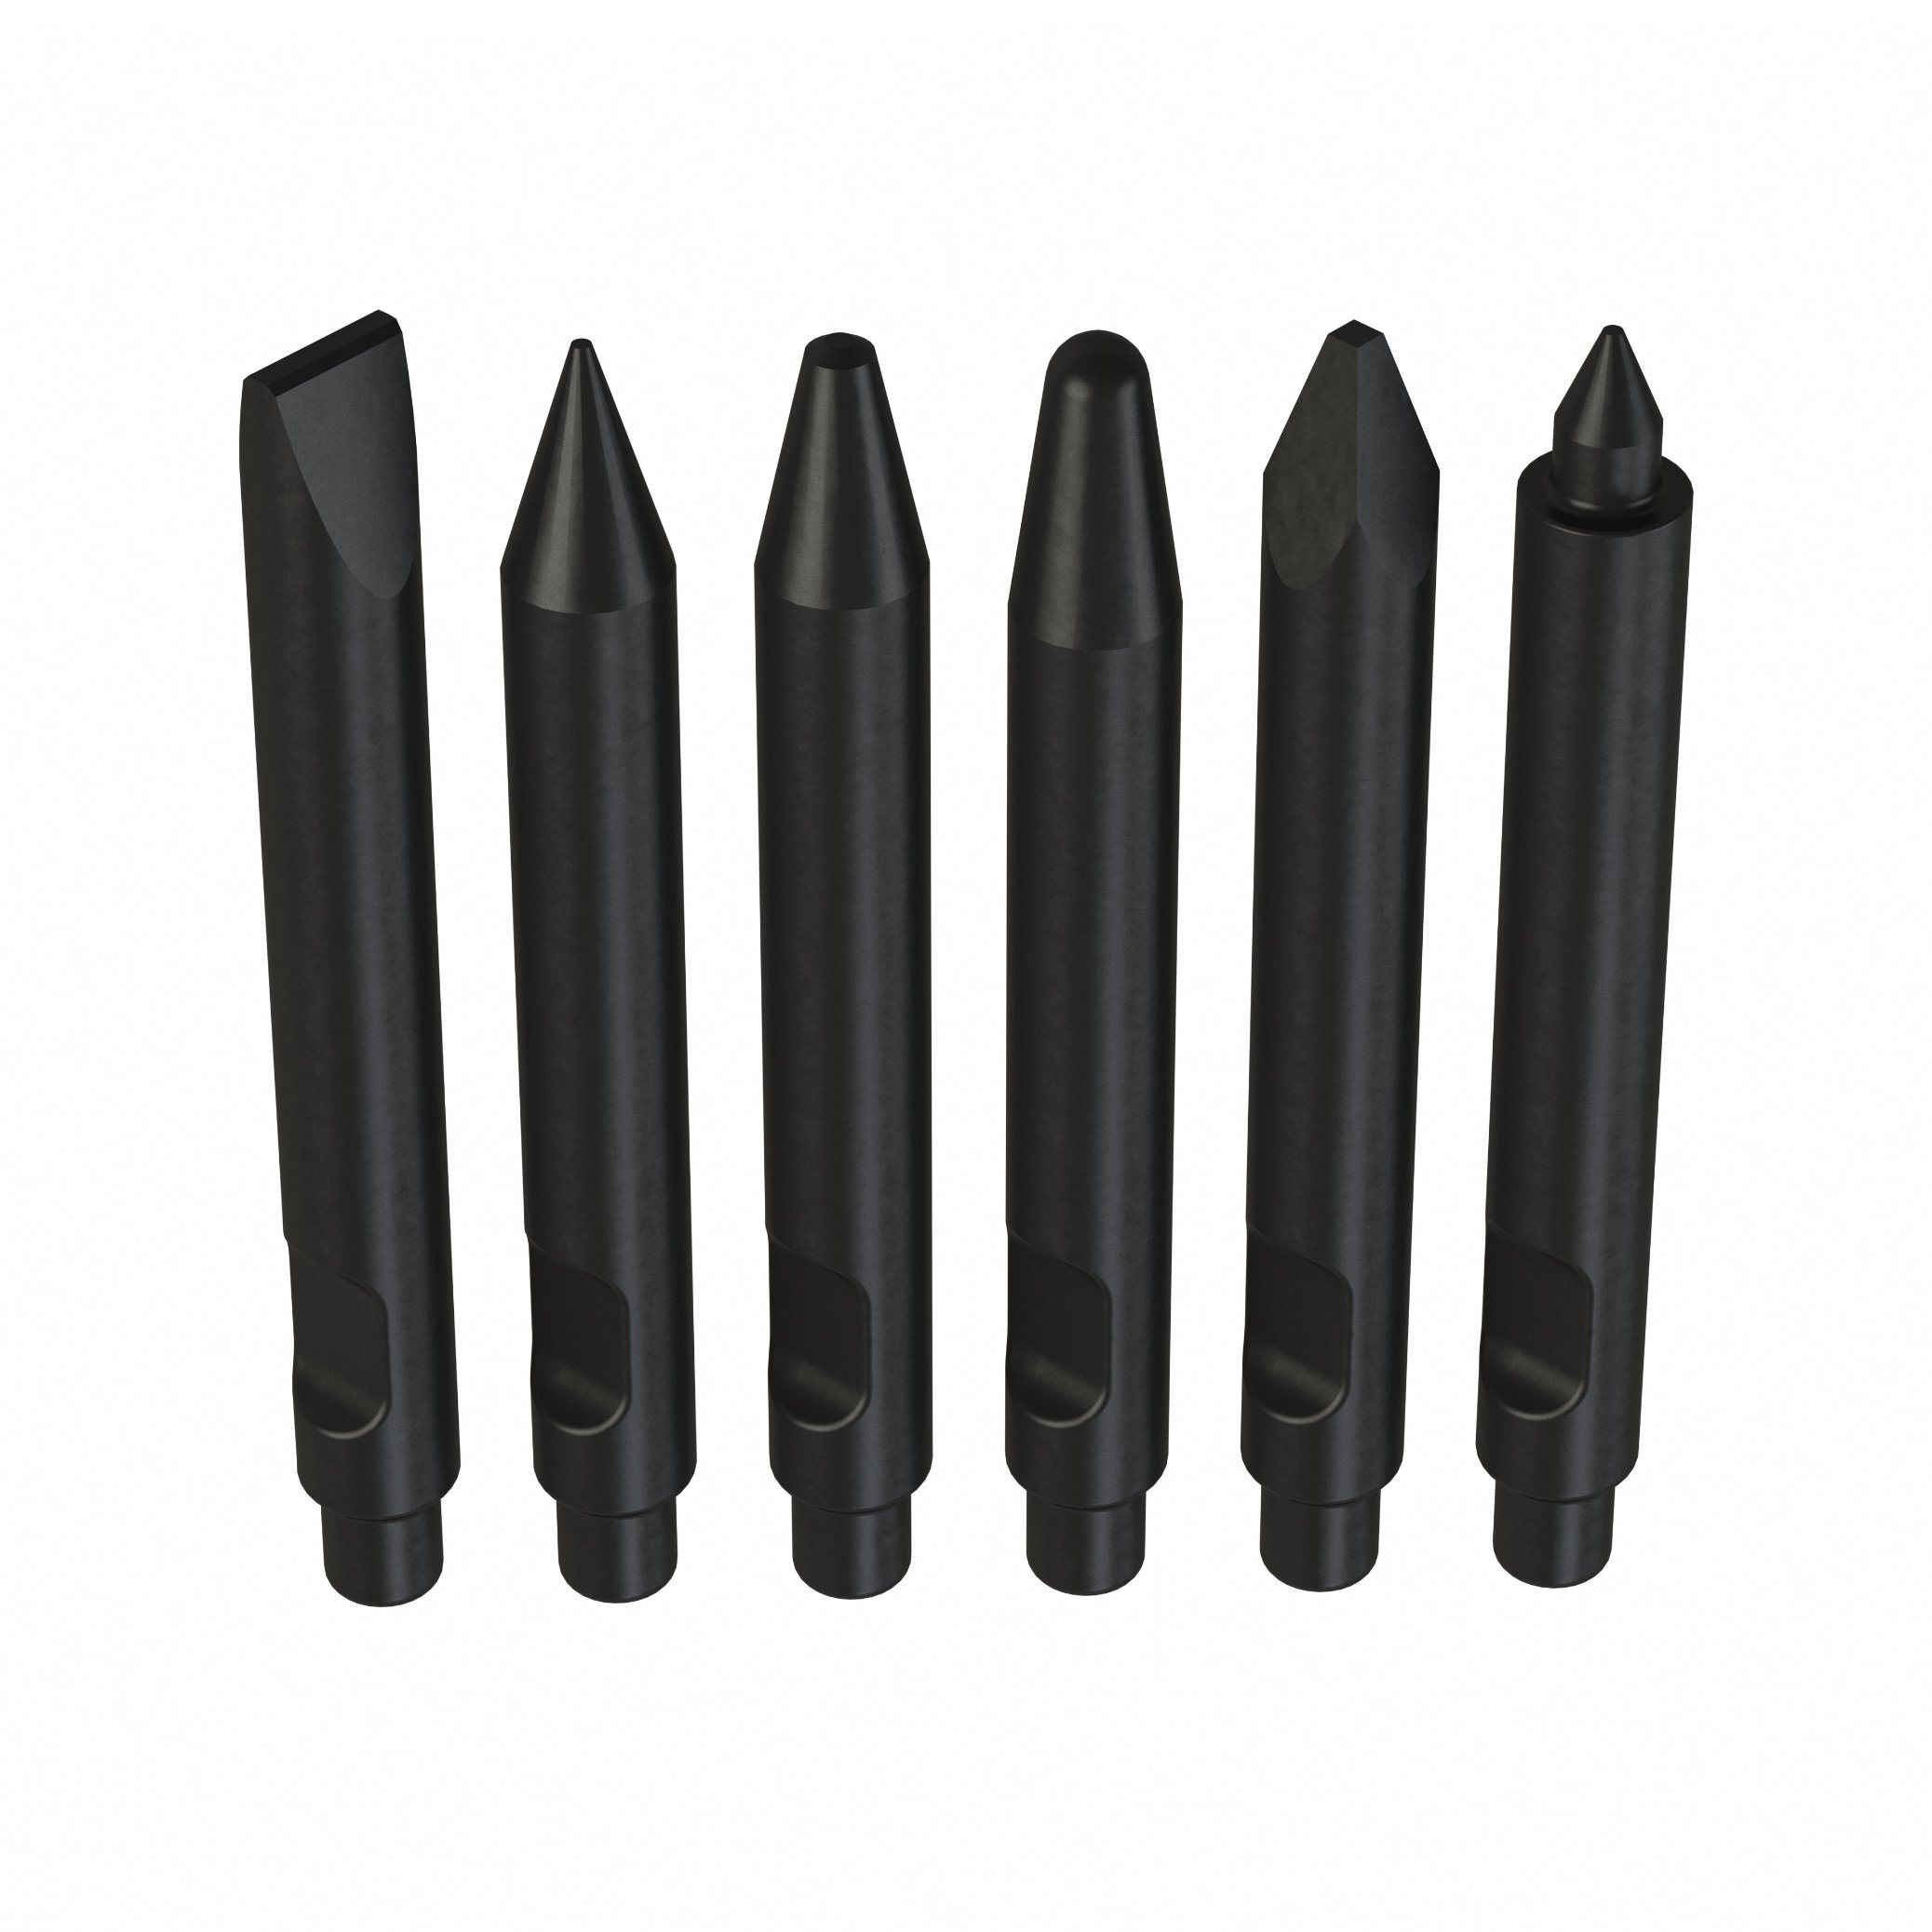 Ms550 Hydraulic Hammer Chisel Tools with Flat Type